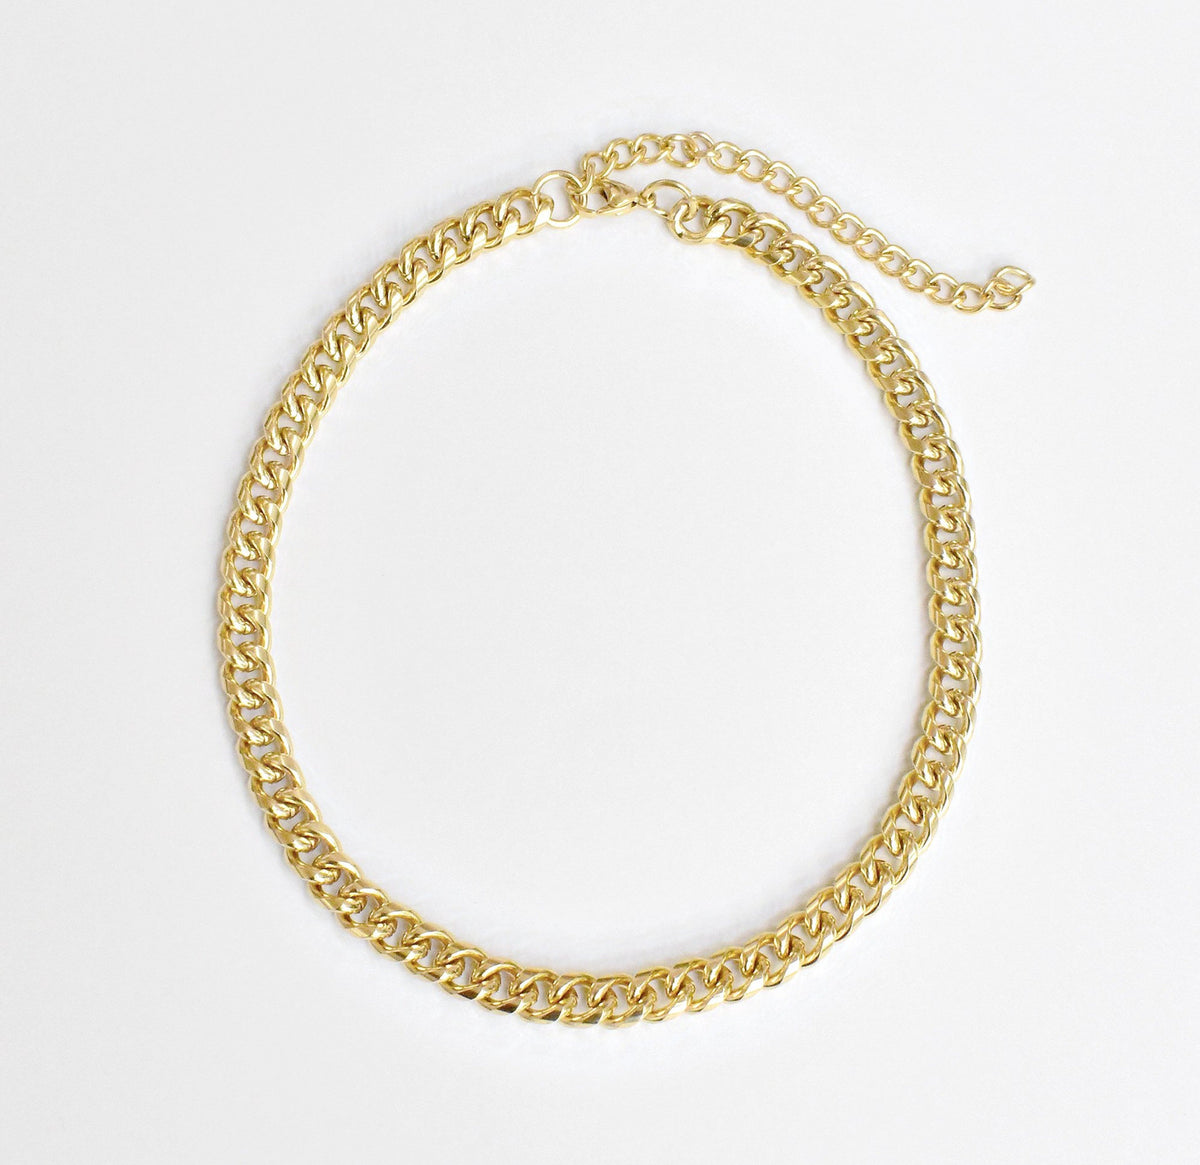 THICK GOLD CHAIN NECKLACE ADJUSTABLE